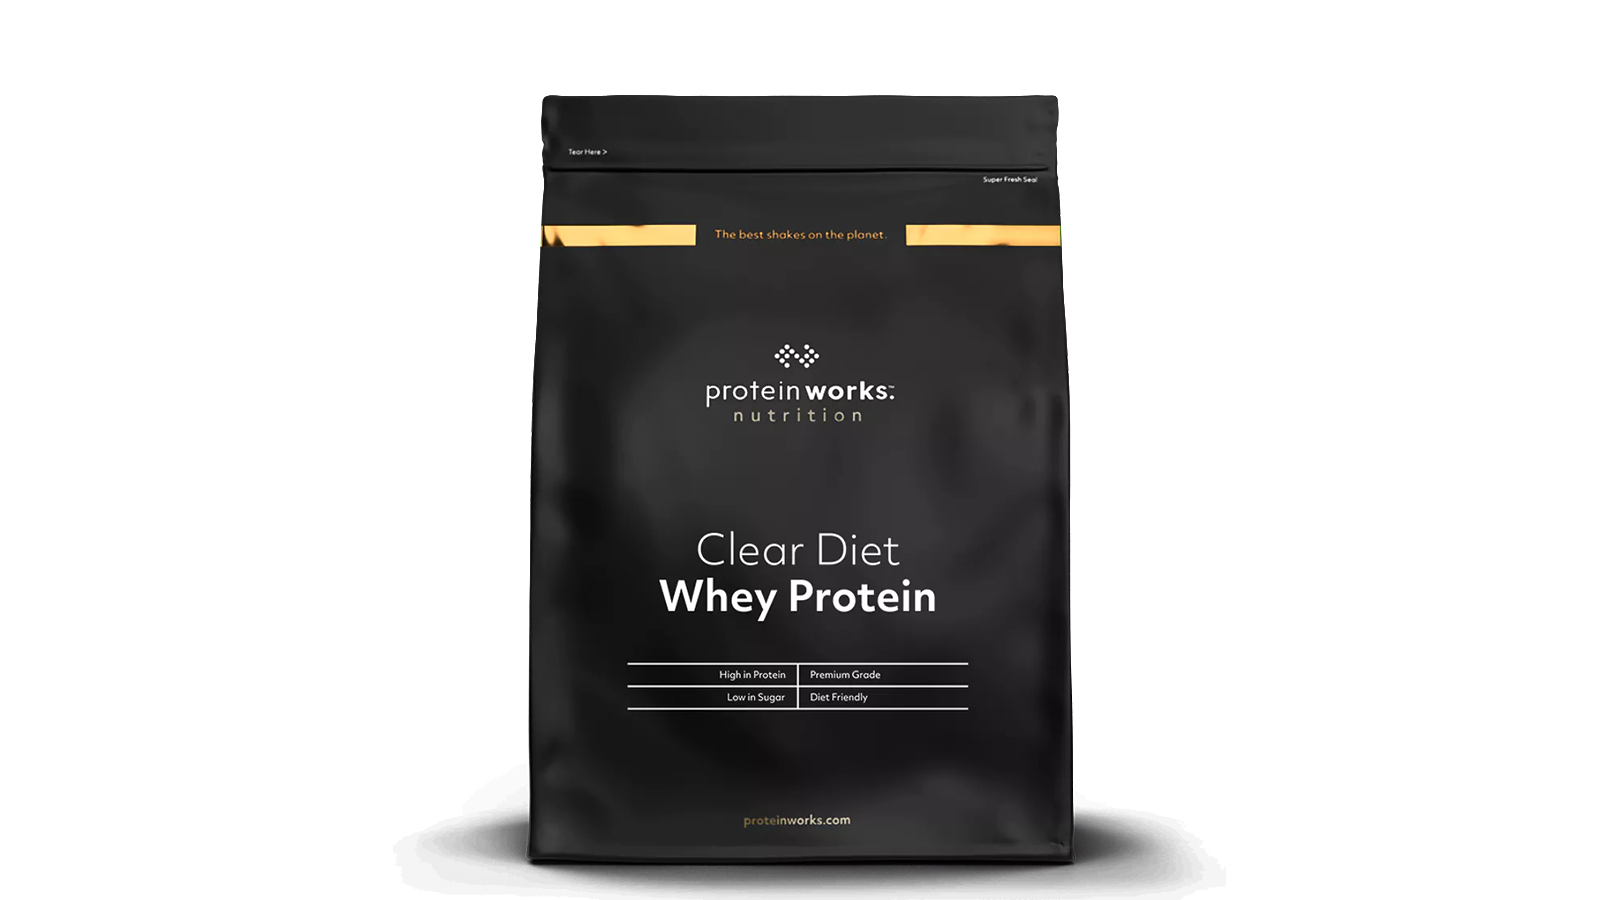 1. The Protein Works